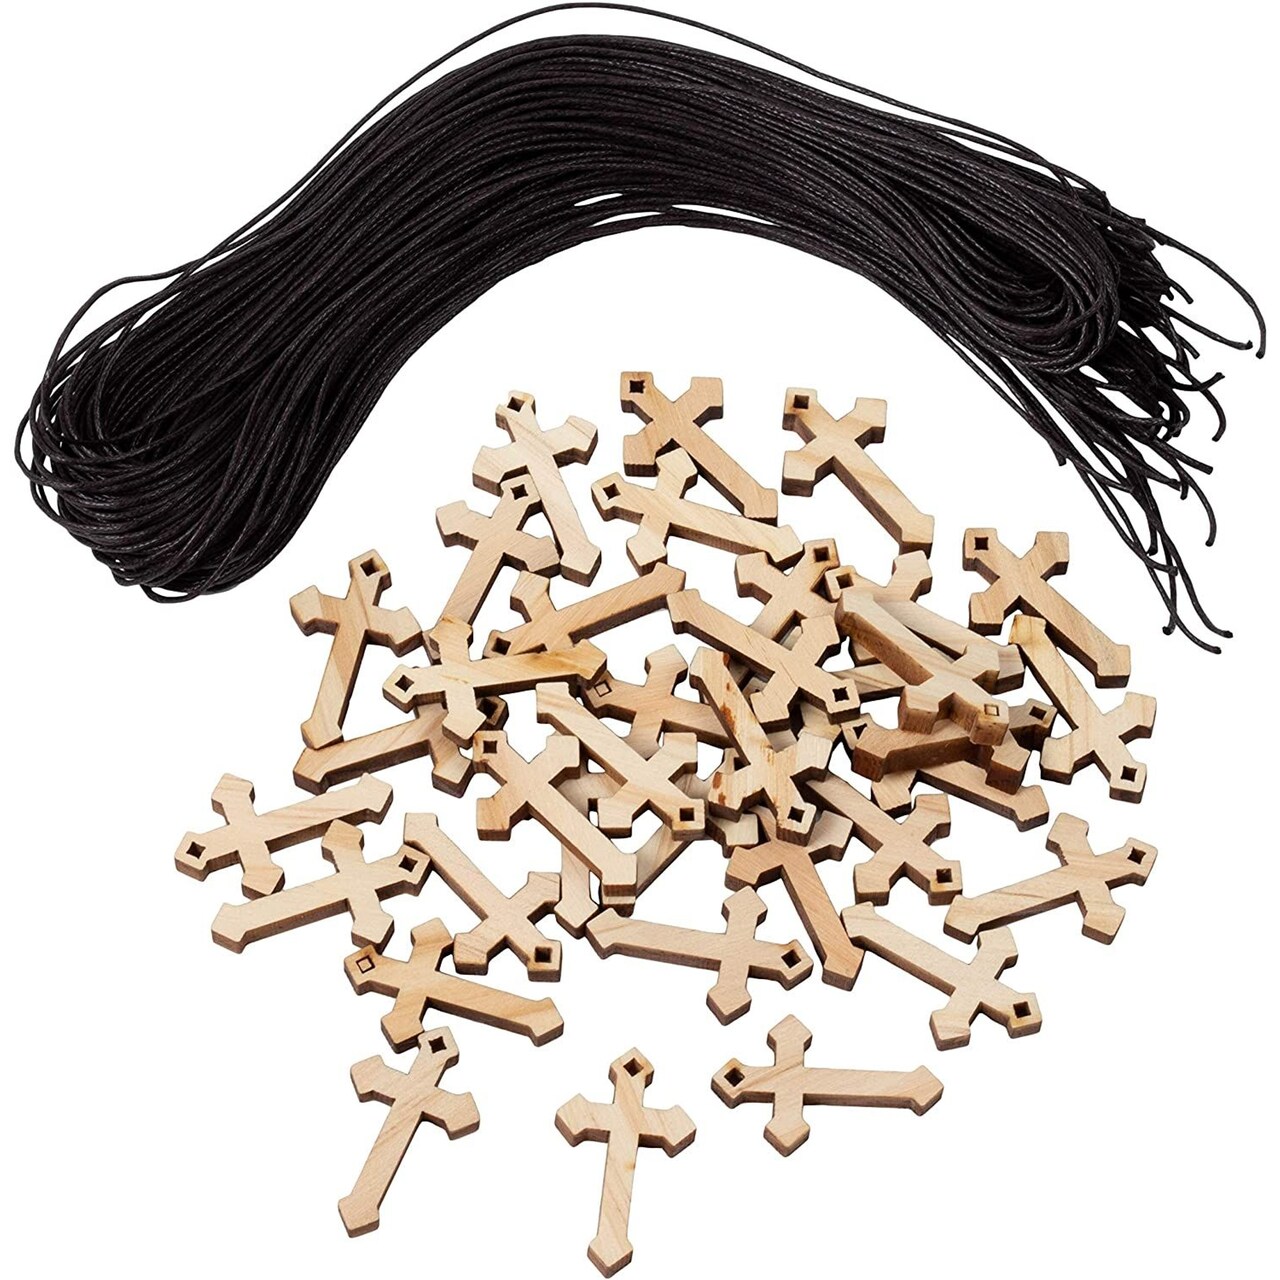 Genie Crafts 36-Pack Bulk Mini Wooden Cross Pendant Necklaces for Gifts,  DIY Wood Arts and Crafts, 1.375 x 0.8 x 0.2 Inches